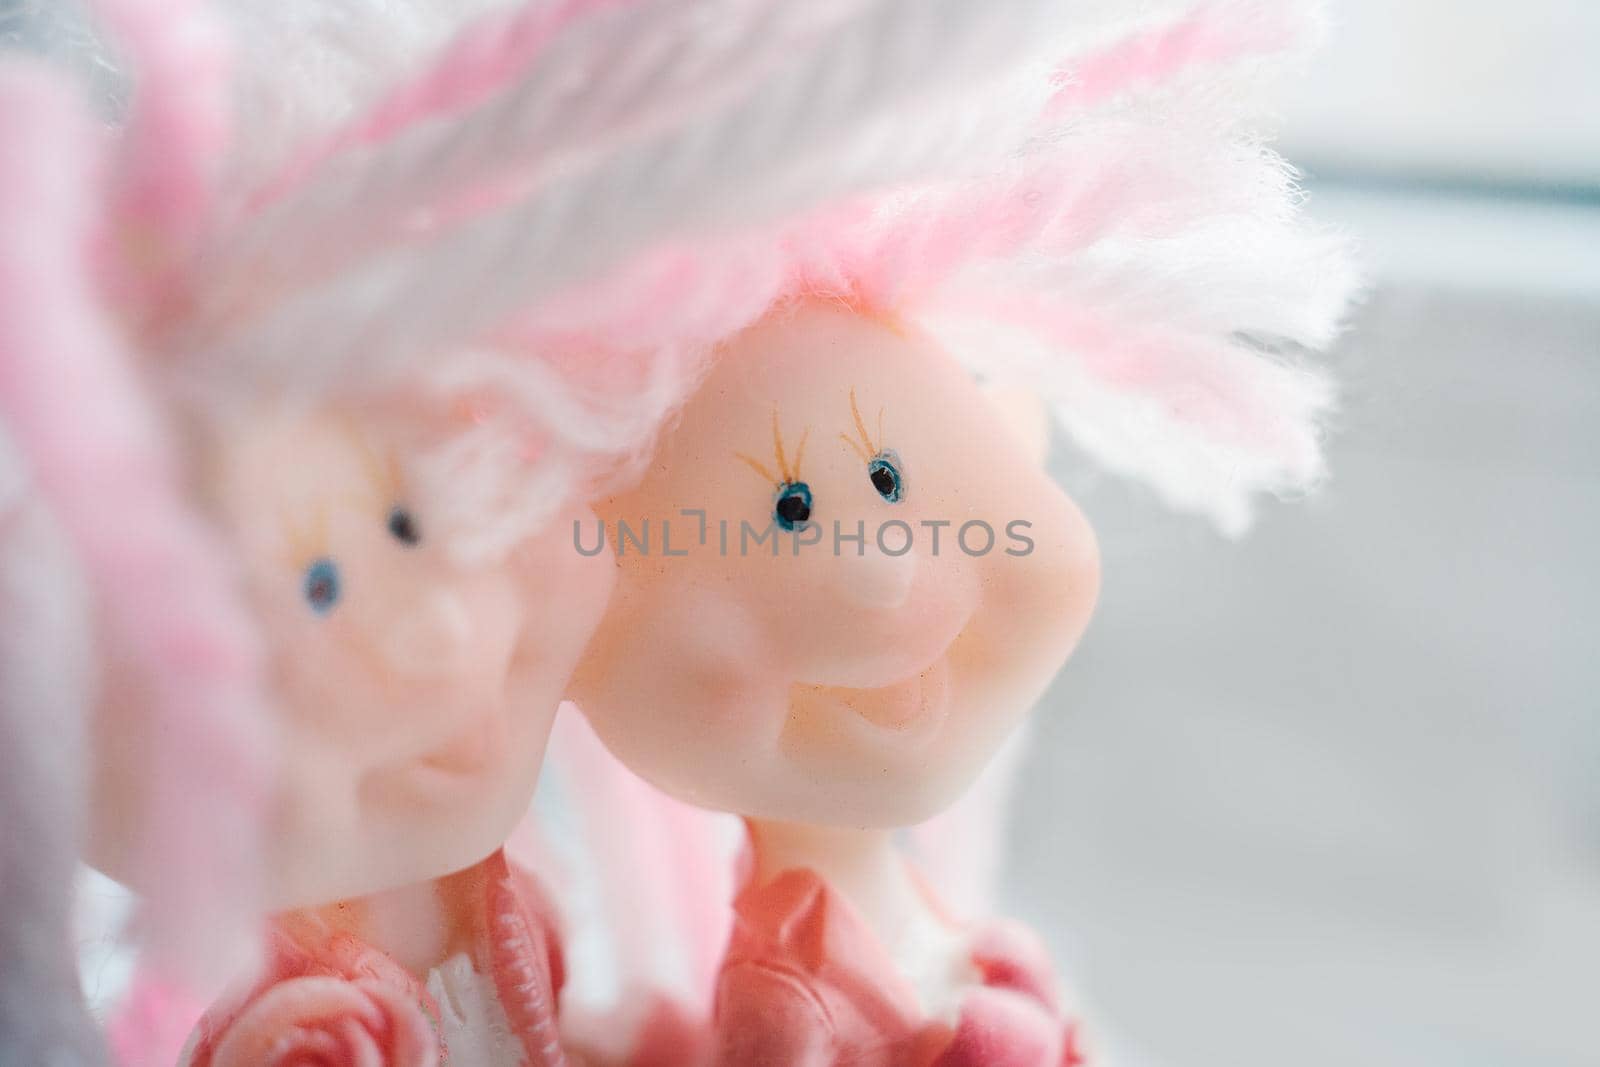 Two funny dolls with funny hairstyles together. The concept of friendship and love. Light photography